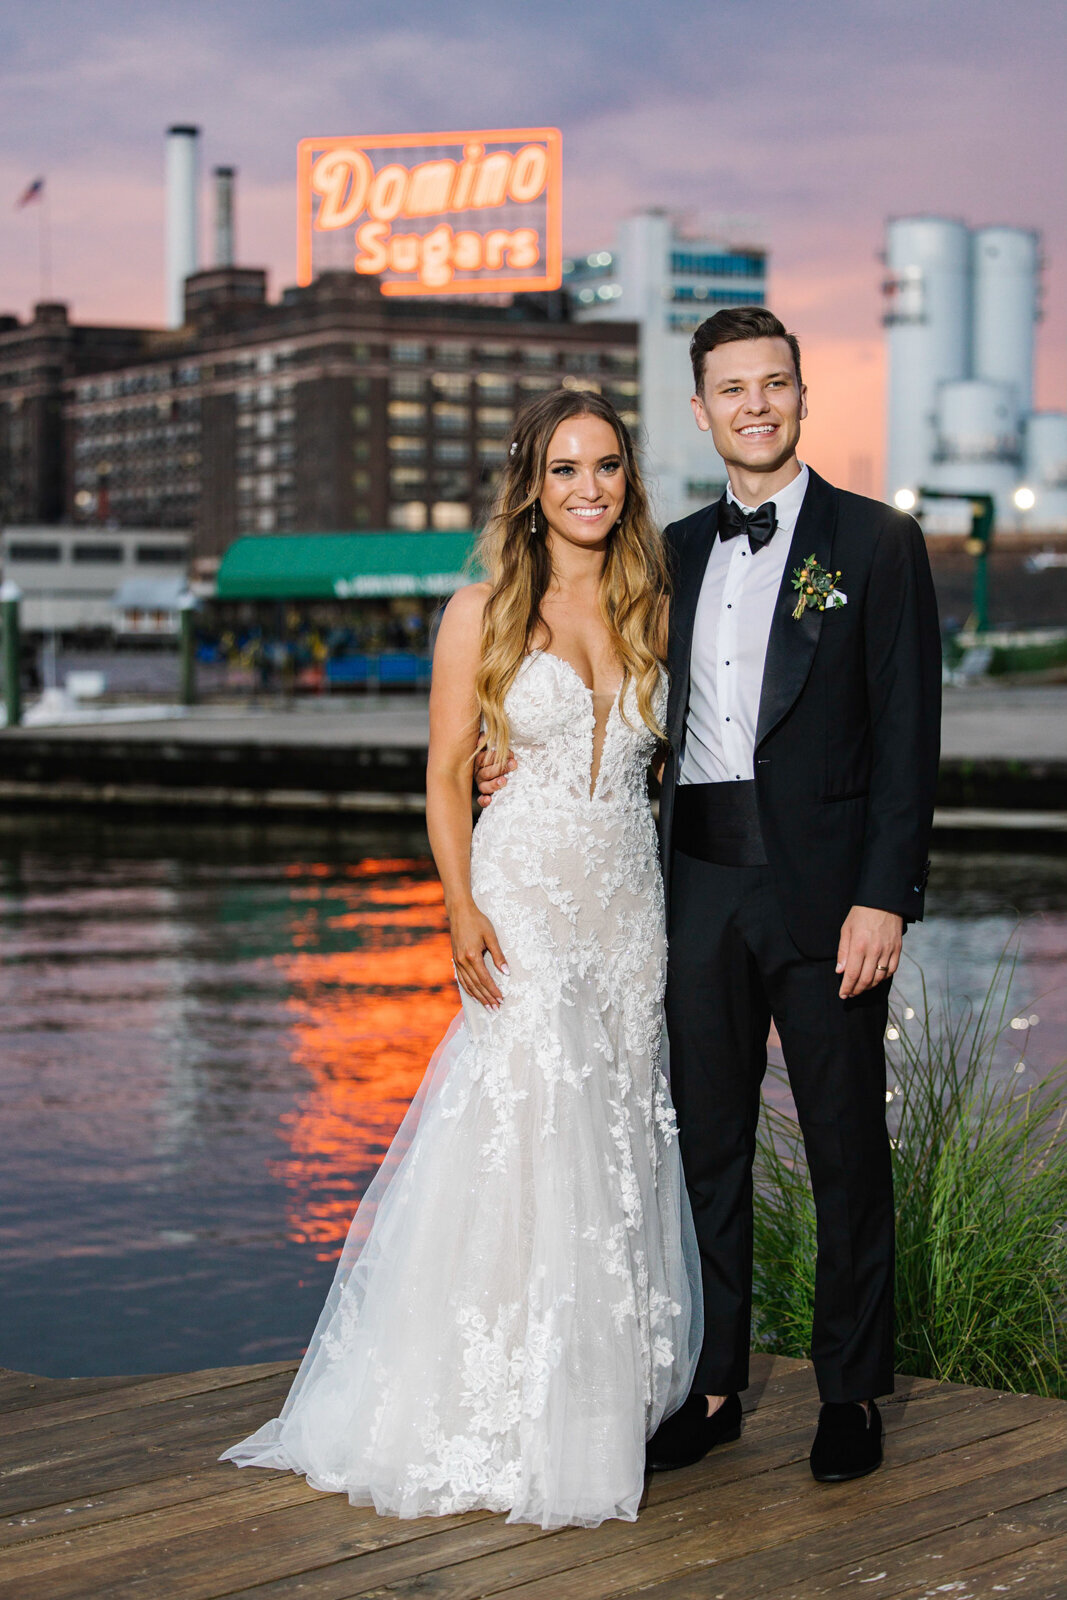 Sunset wedding photos in front of the Domino Sugars Sign